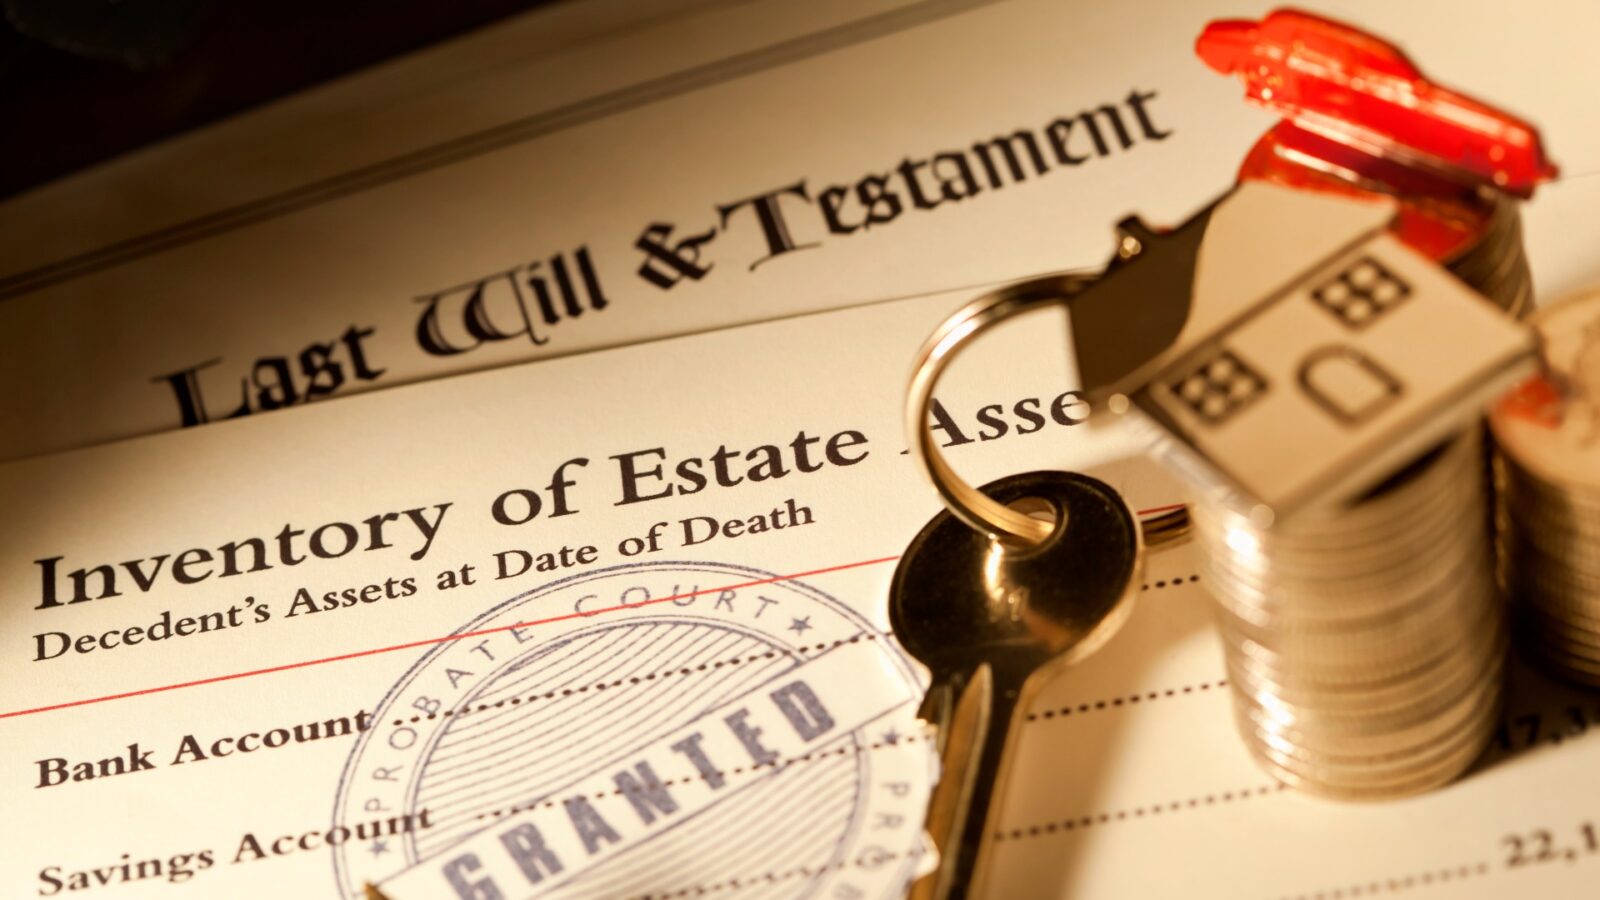 Can a will be contested after probate?